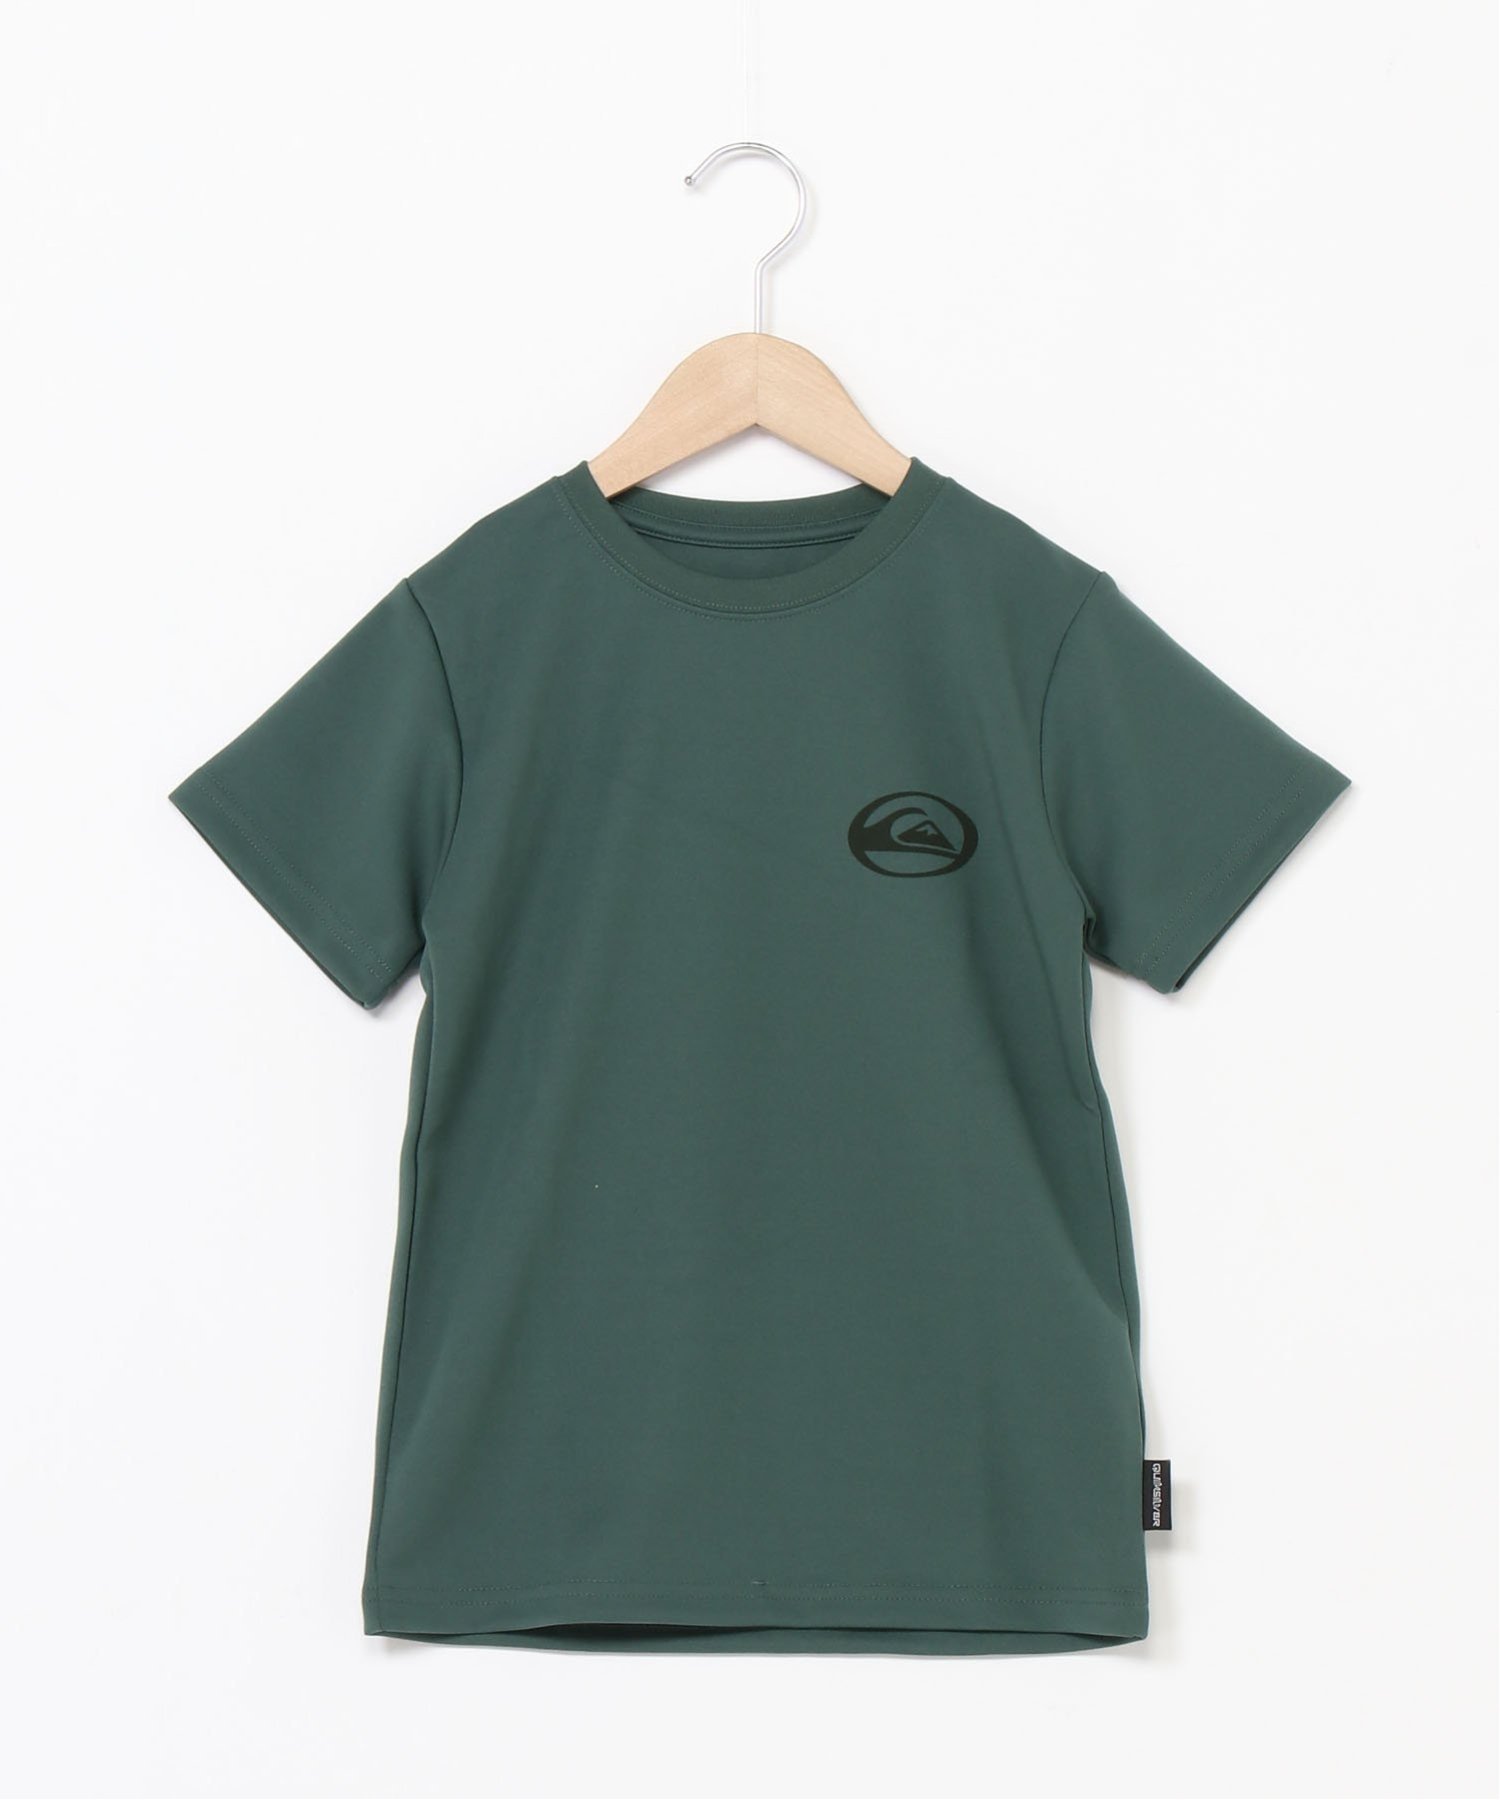 QUIKSILVER (K)SATURN LOGO SS YOUTH NCbNVo[ EXCObY bVK[h O[ O[ ubN zCg